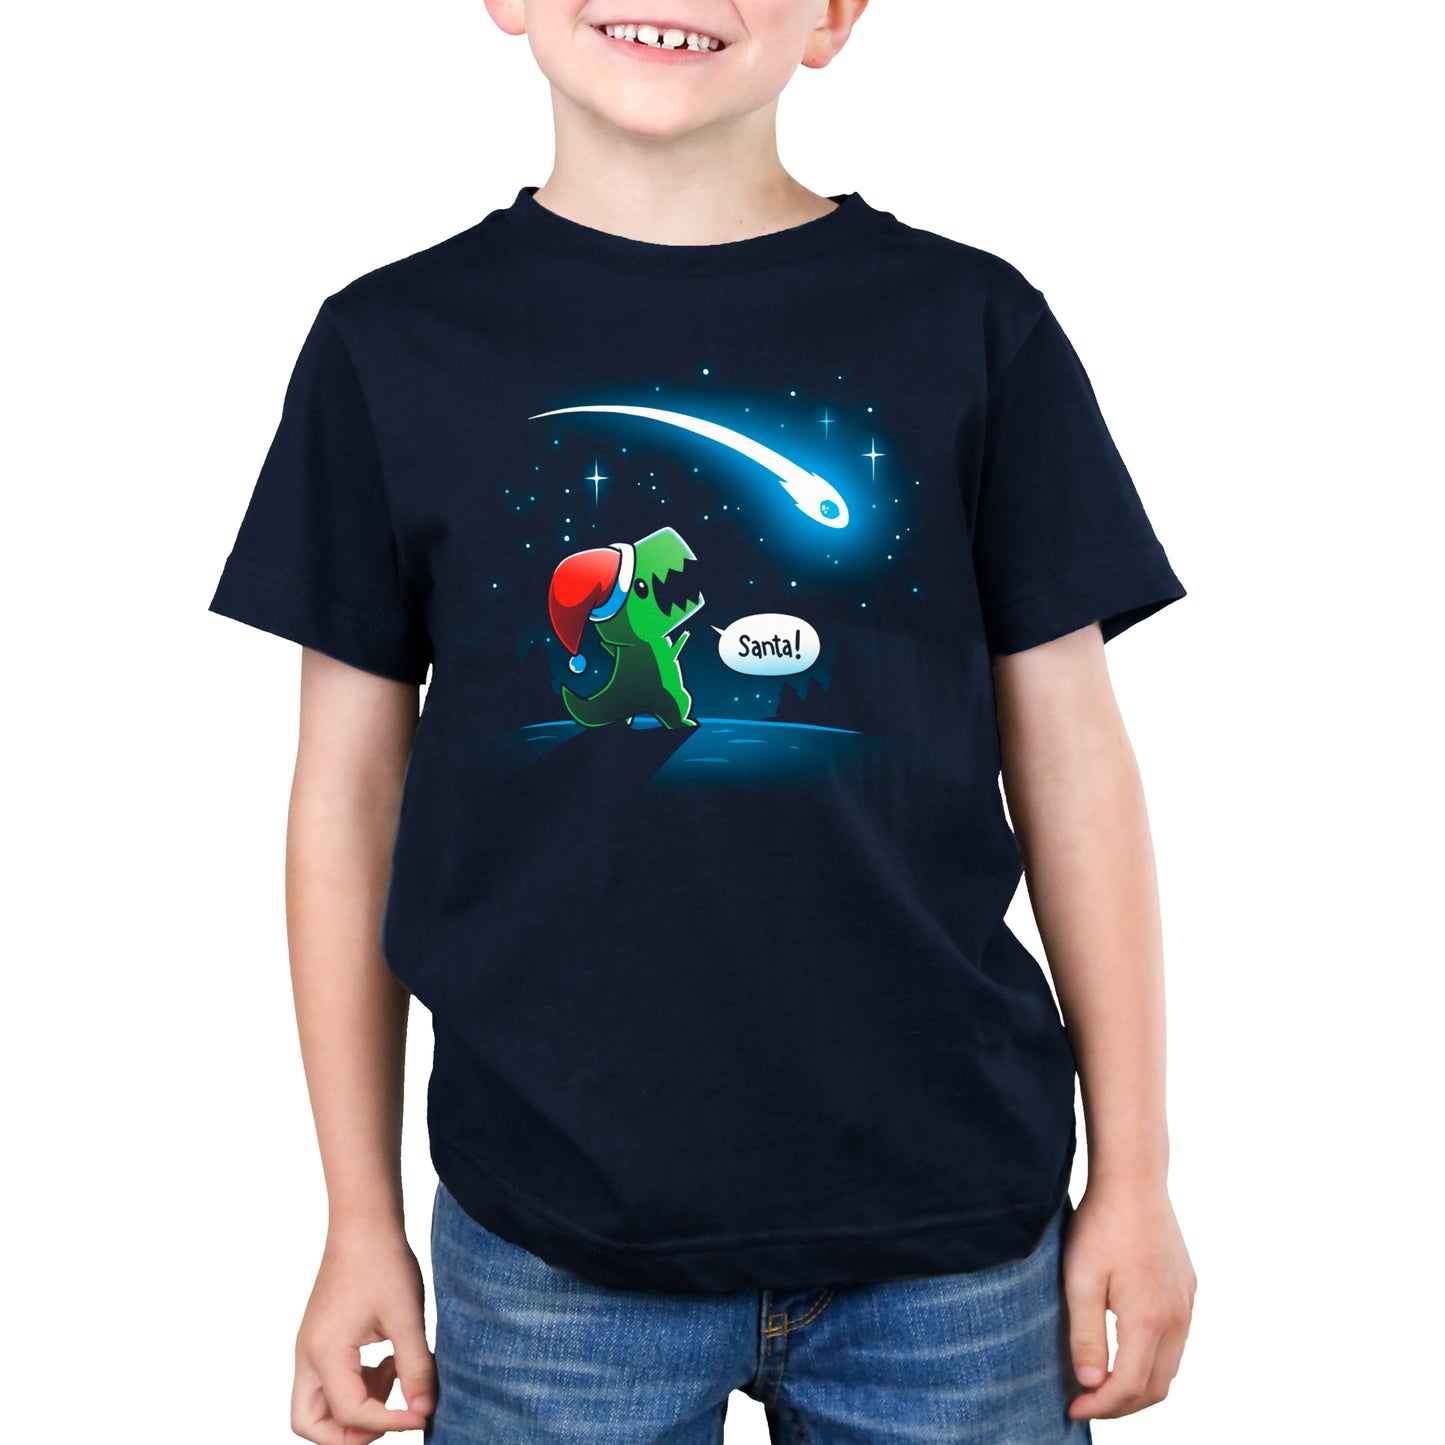 A boy wearing a navy blue TeeTurtle T-shirt with a dinosaur on it.